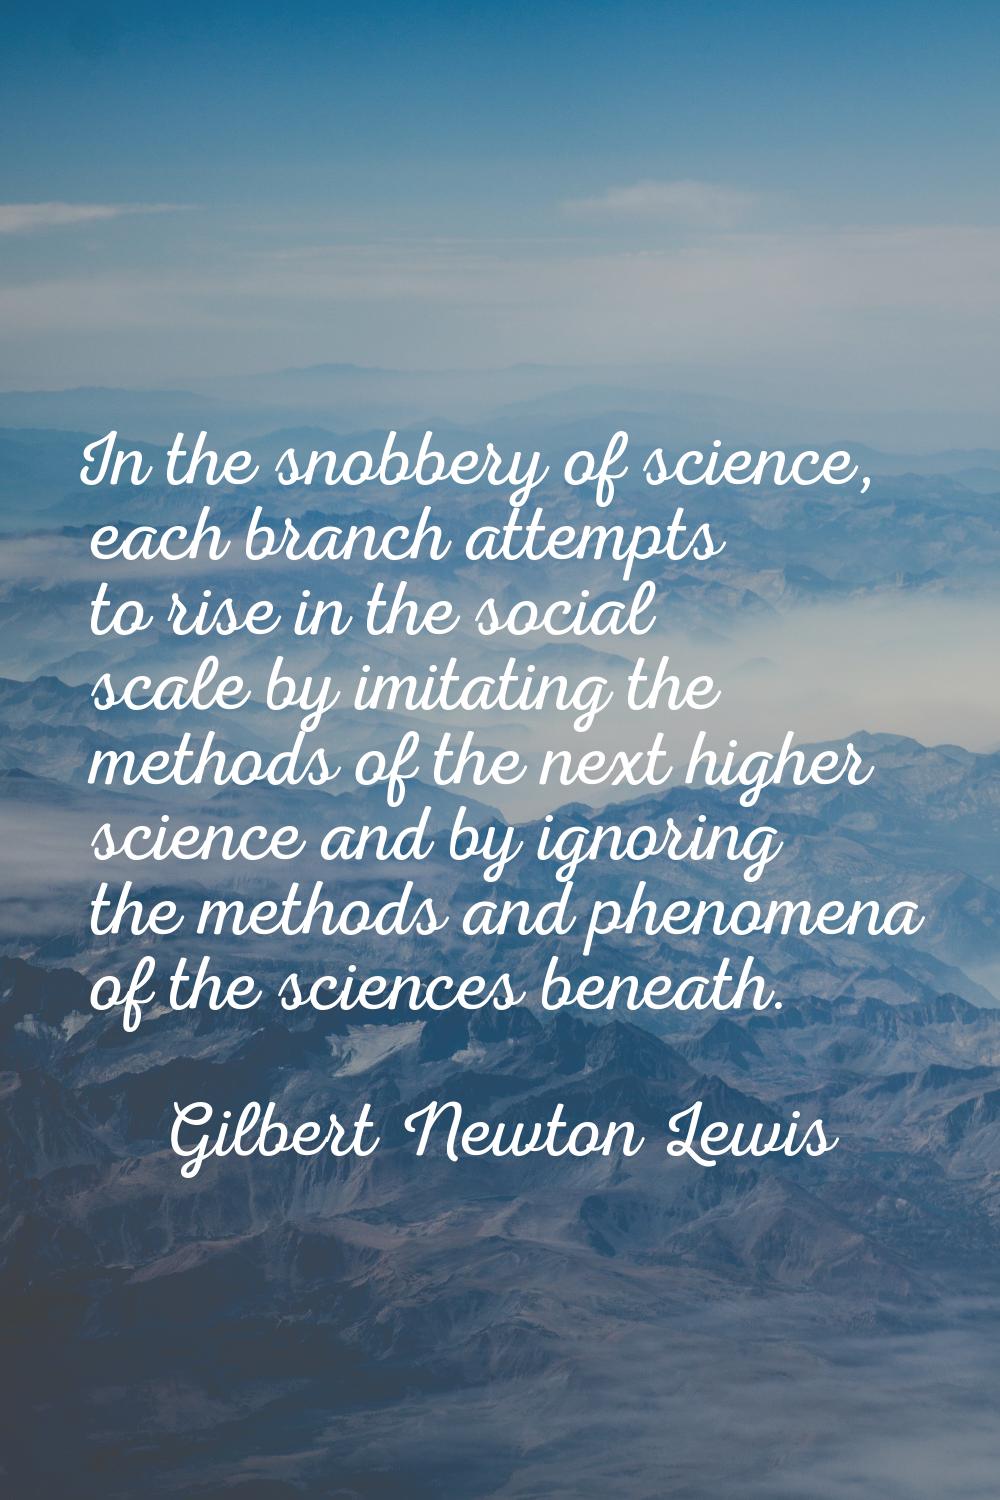 In the snobbery of science, each branch attempts to rise in the social scale by imitating the metho